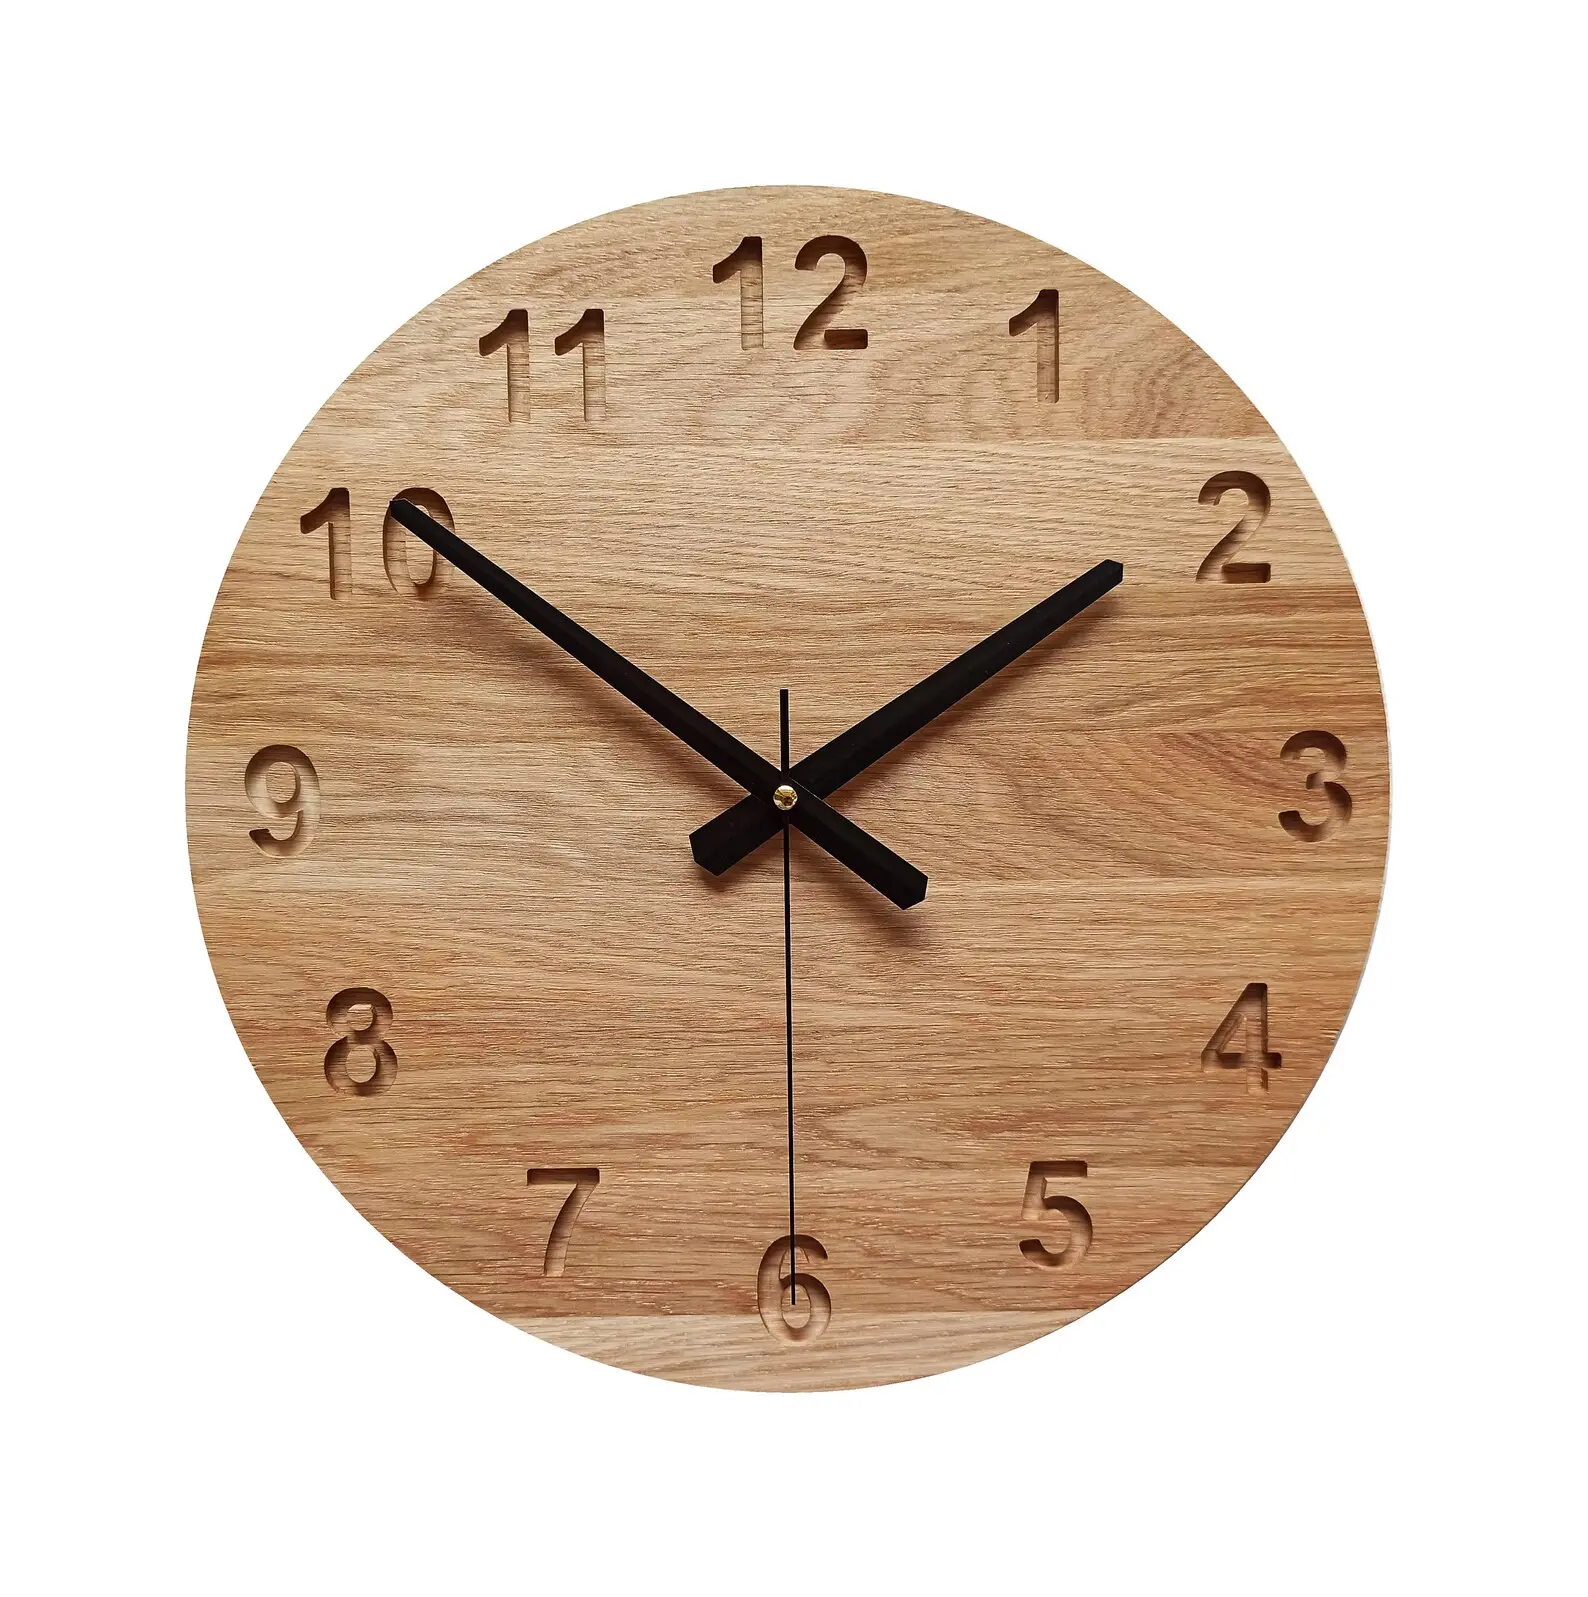 Hand Made Solid Acacia Wood Medium Size Wall Clock for Living Room Wooden Wall Decoration from Indian Supplier By Mehak Impex